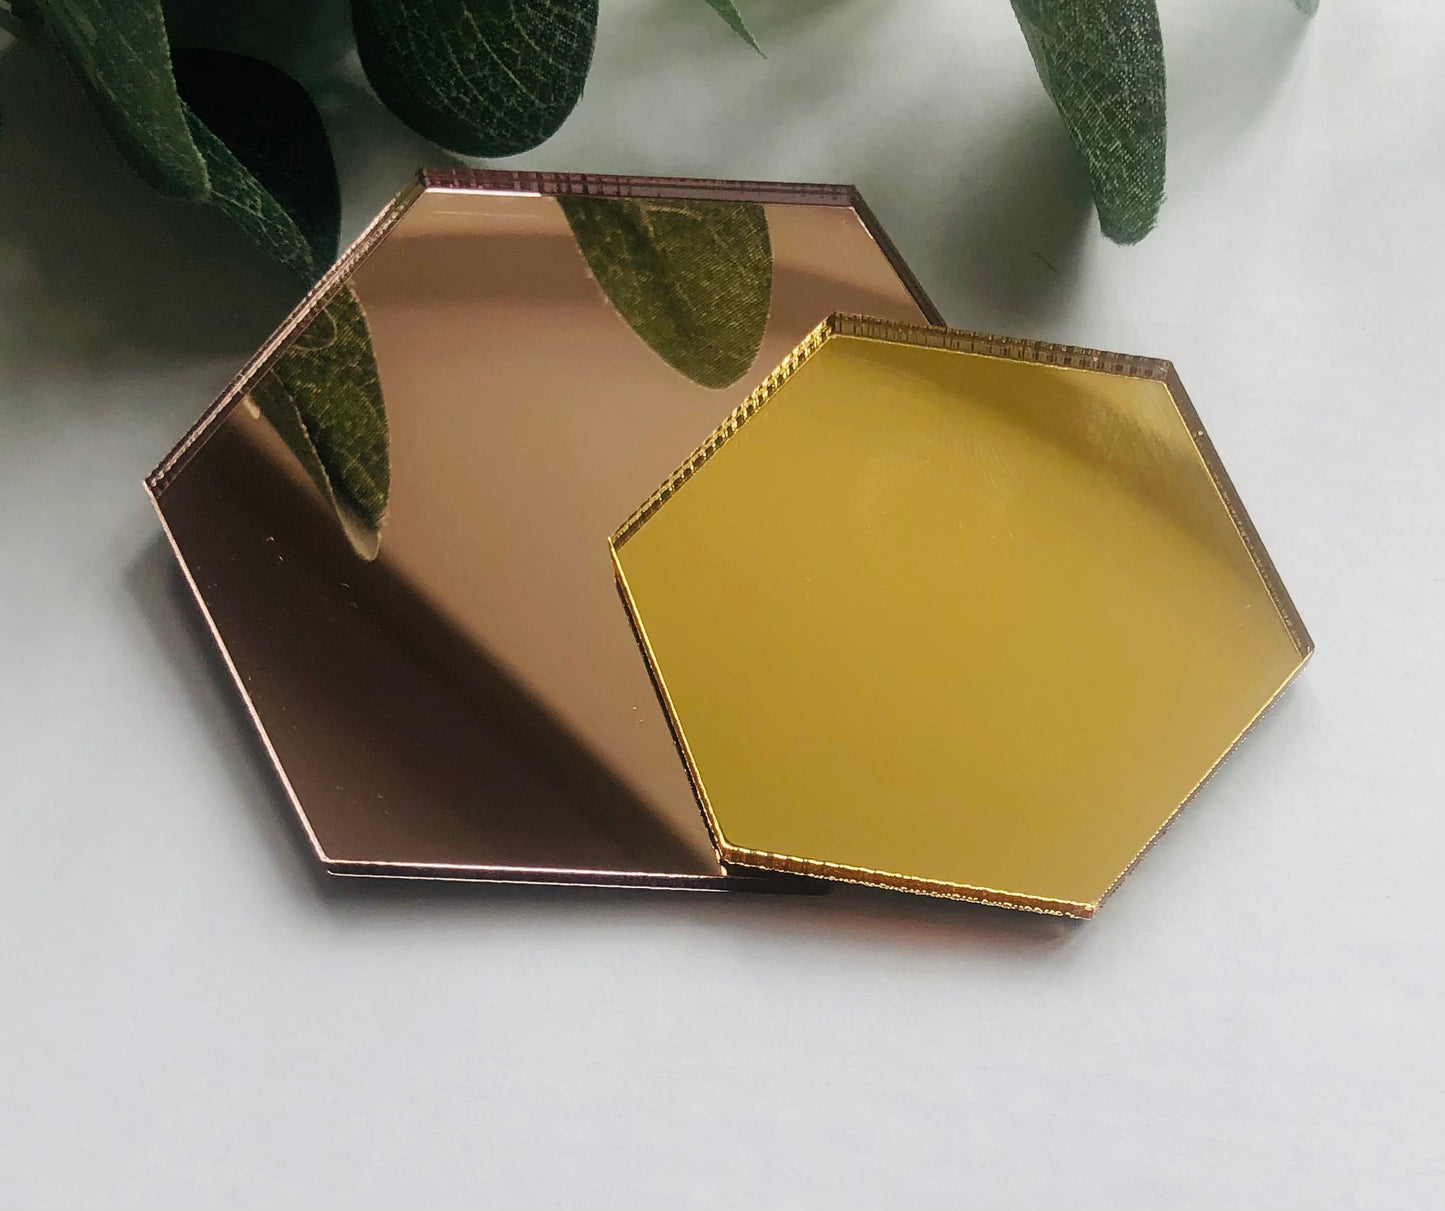 Mirrored Acrylic Hexagon Ideal Blank For Many Crafts Including Wedding Place Settings. Rose Gold, Gold and Silver.